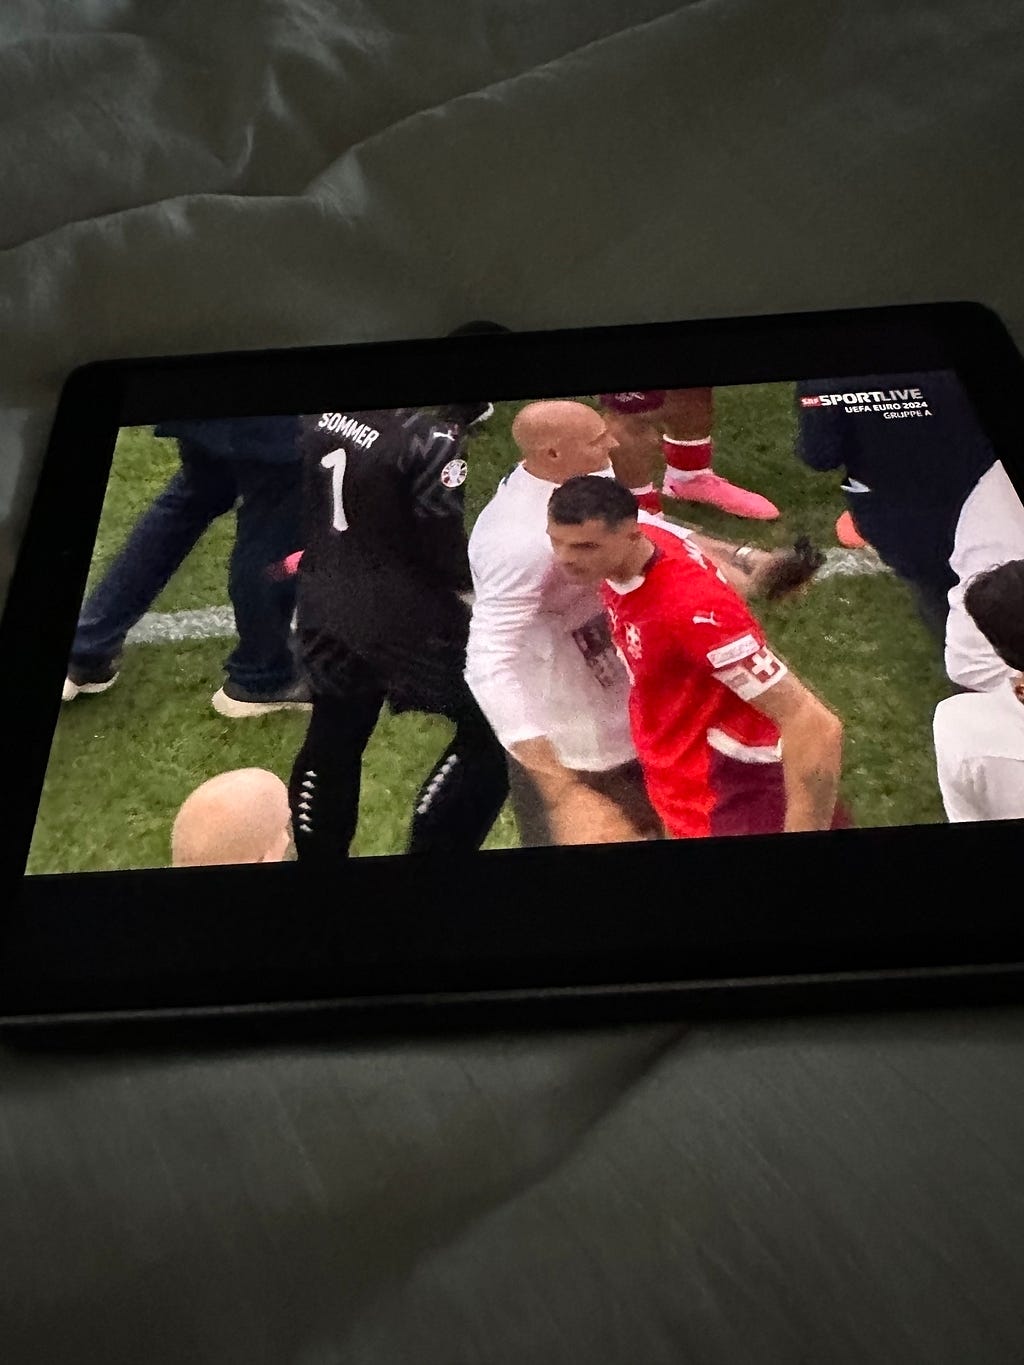 A tablet displays a scene of people on a sports field, with some wearing sports jerseys and others in white clothing, suggesting a post-game interaction.